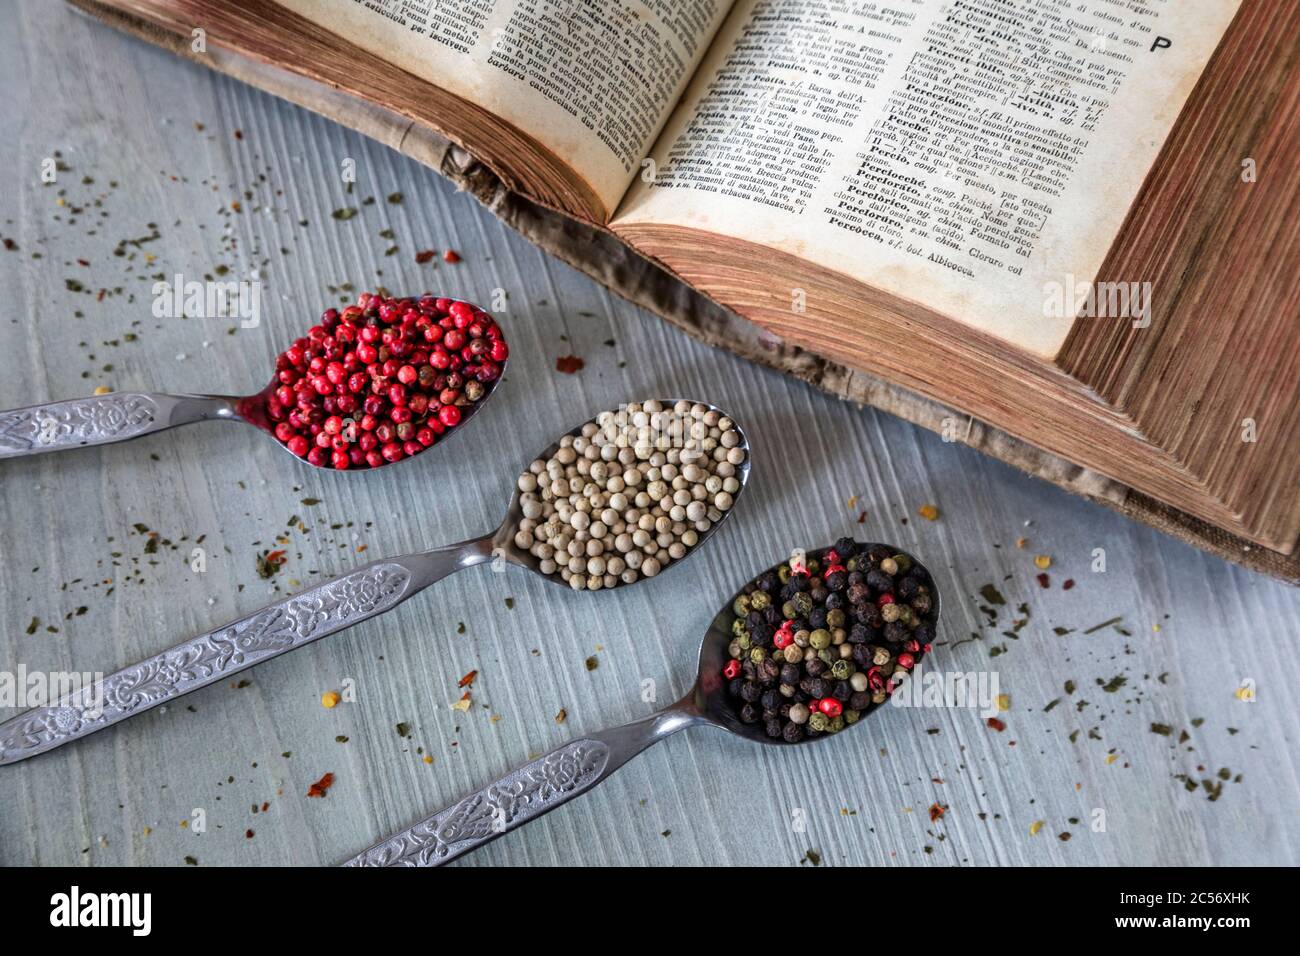 spoons full of multicolored peppercorns, pepper, spices Stock Photo